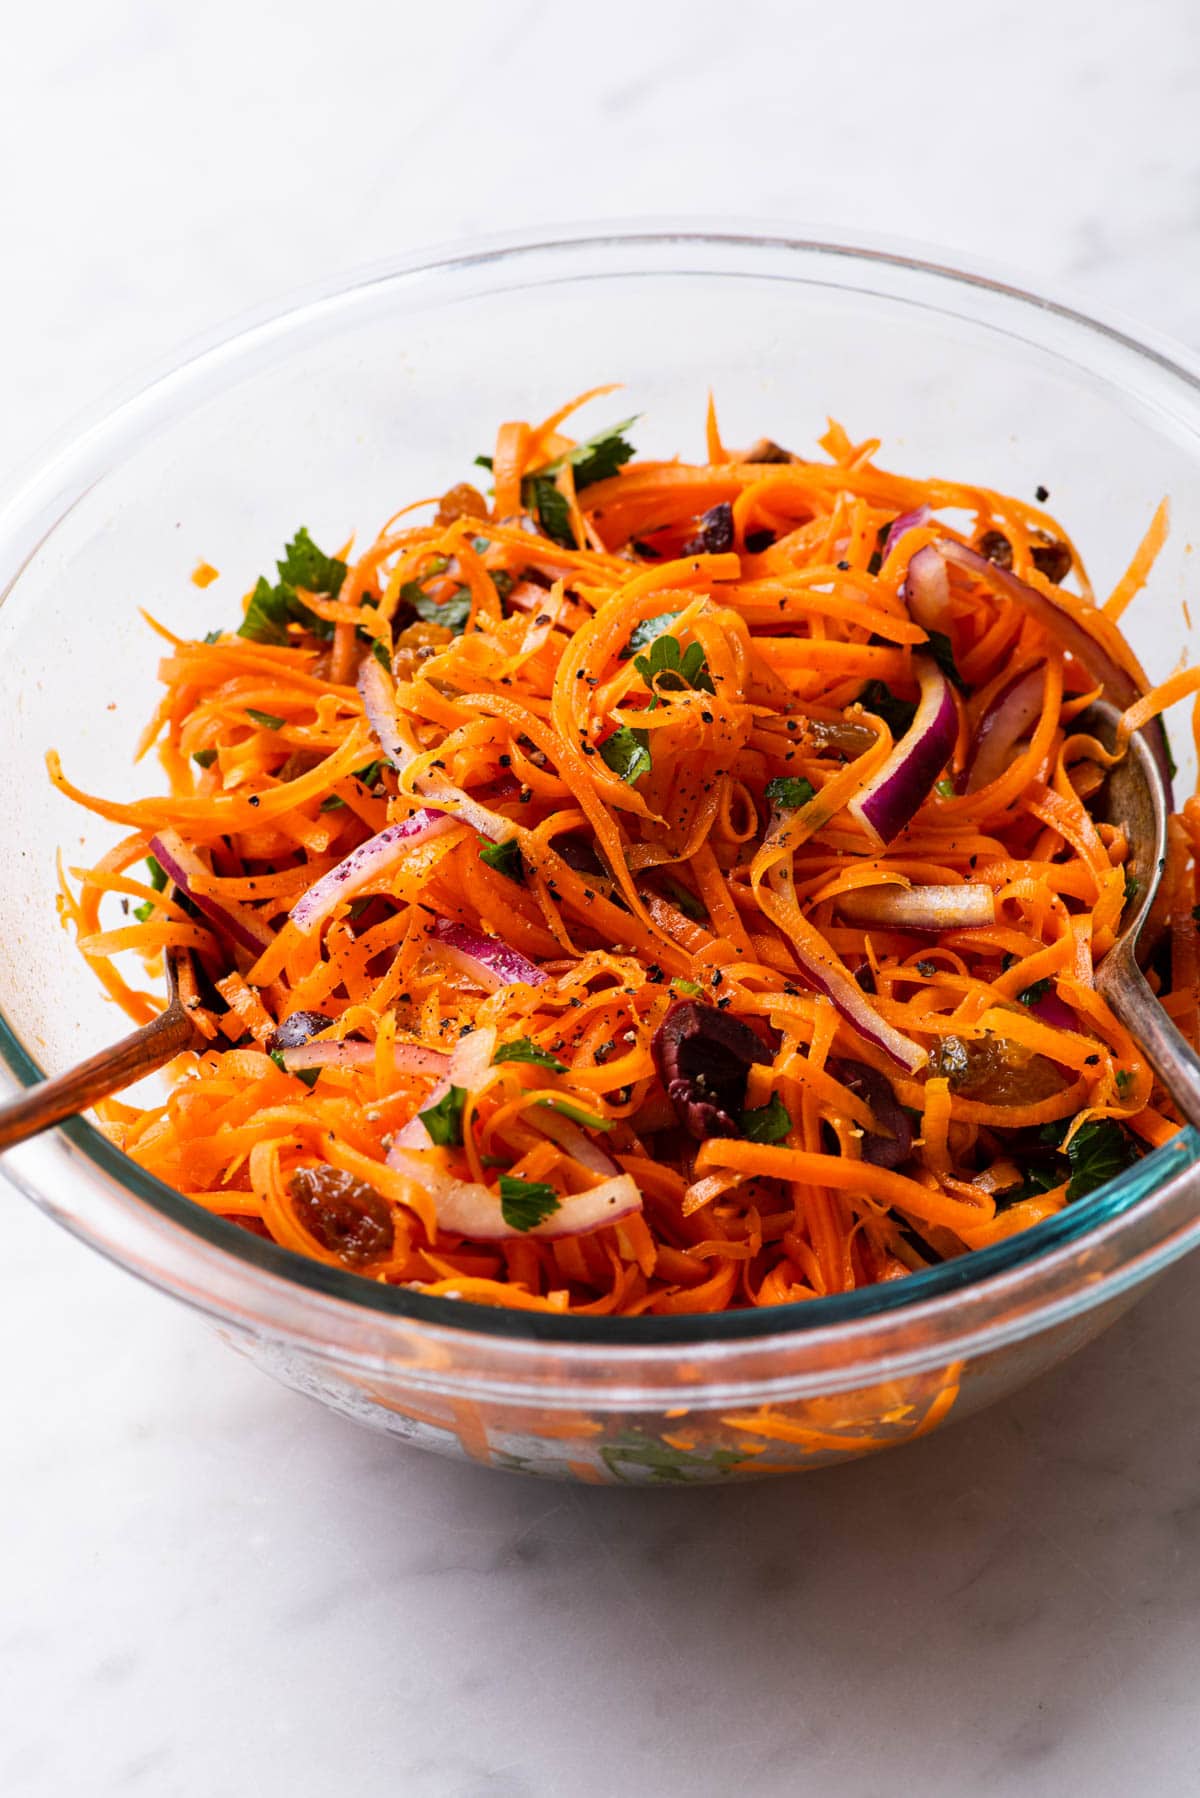 Shredded carrot slaw with raisins, parsley, olives, and red onion.